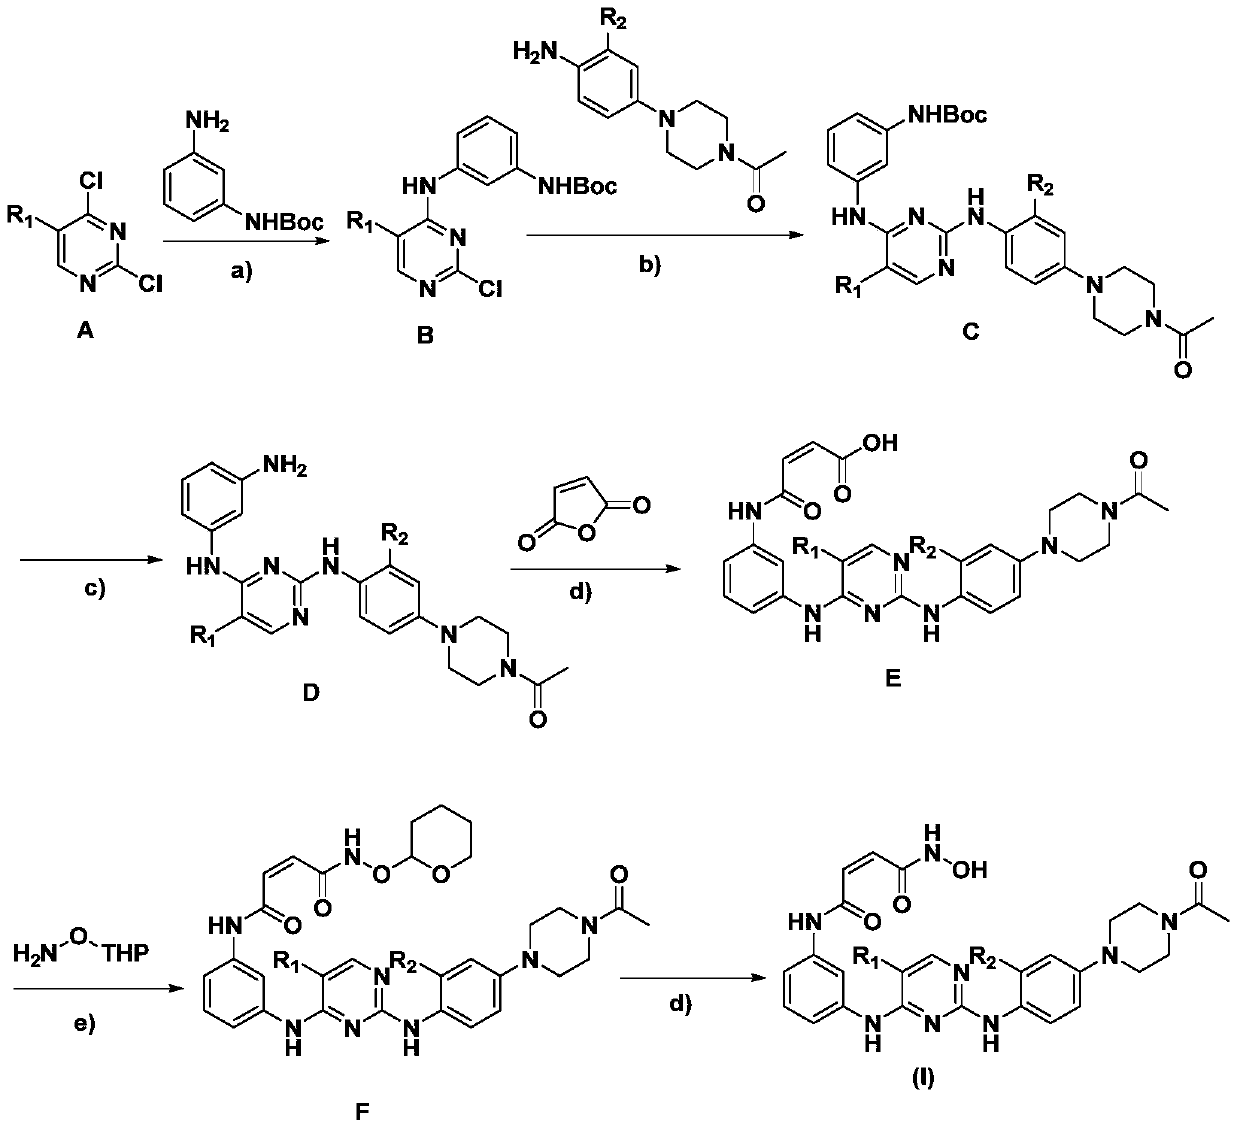 2,4-diarylaminopyrimidine derivatives containing hydroxamic acid fragments and their preparation and application